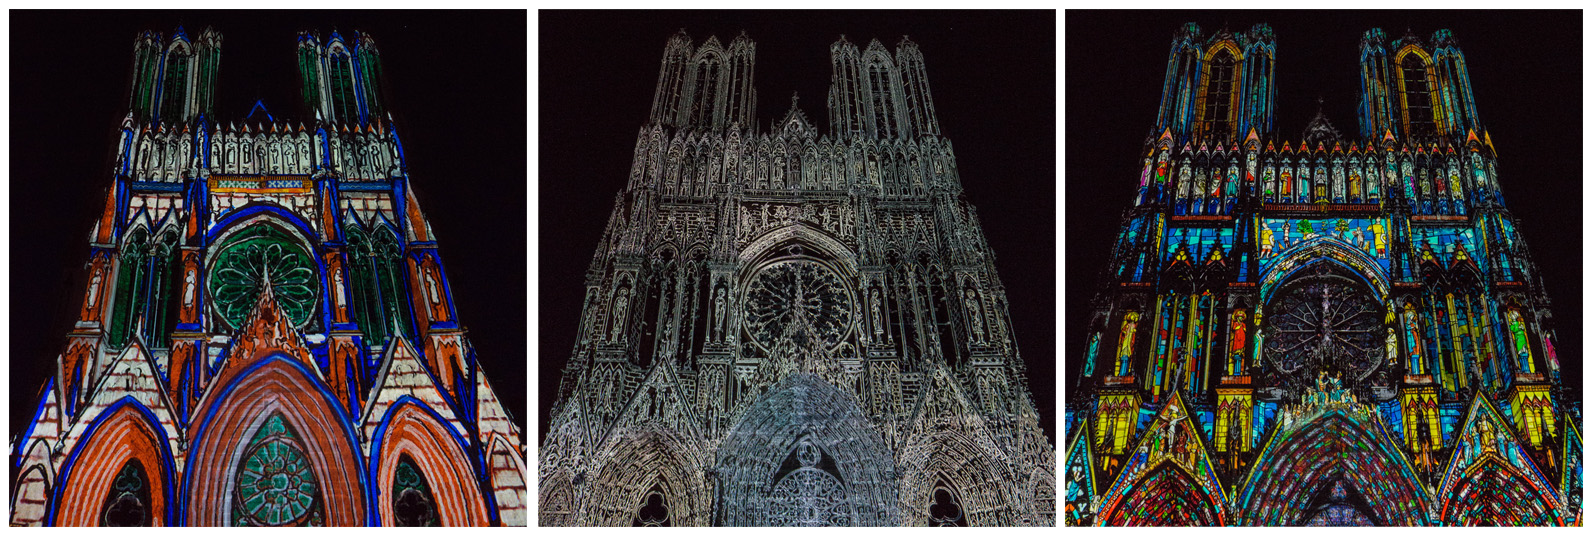 Reims walk night views of Cathedral